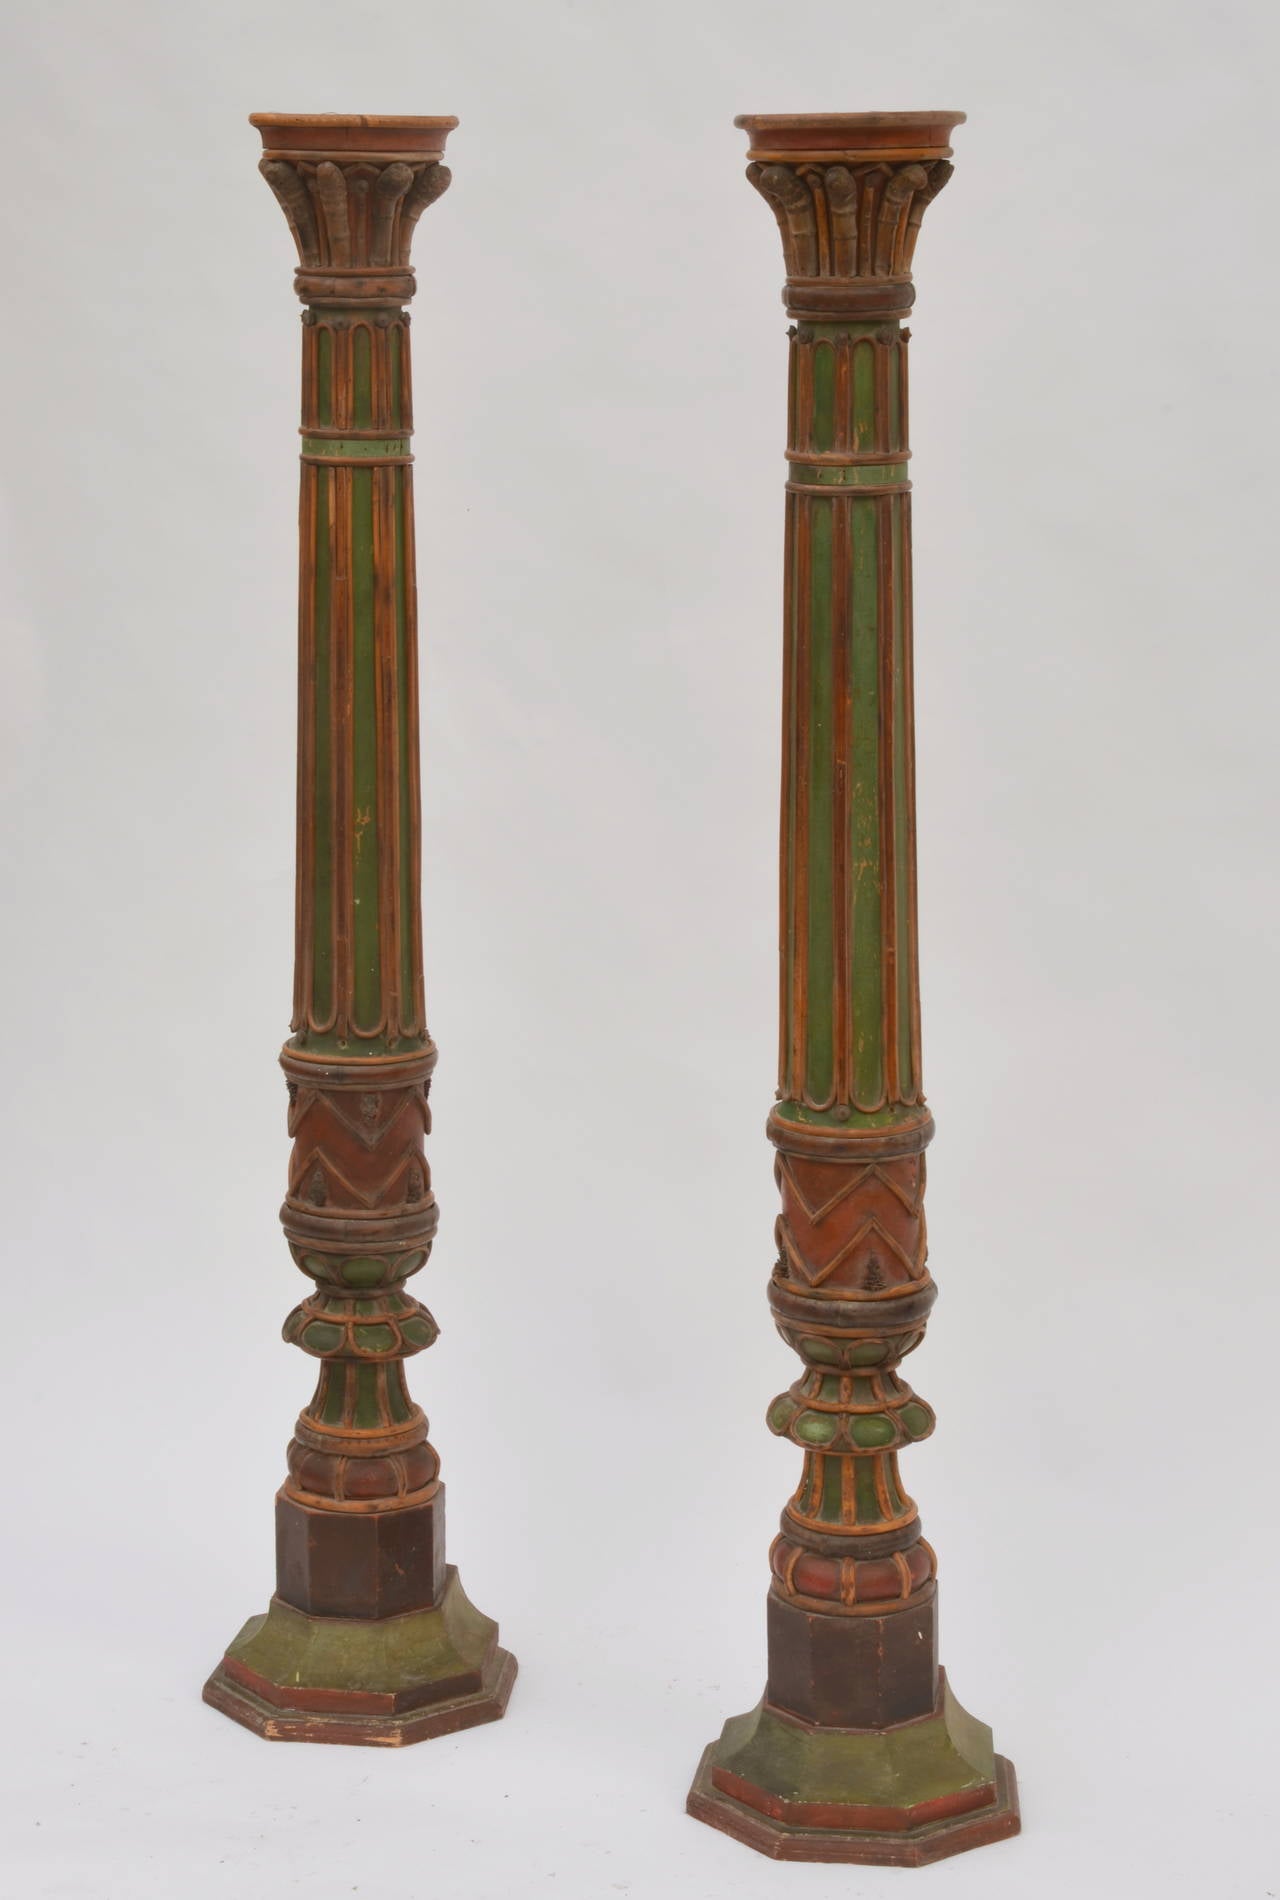 Pair of impressive French 19th century Napoleon III Torchere Columns. Can be used as floor lamps or agains the wall as torcheres. Or just as decorative columns. 12 in. diameter at bottom and 7.5 in. diameter at top.